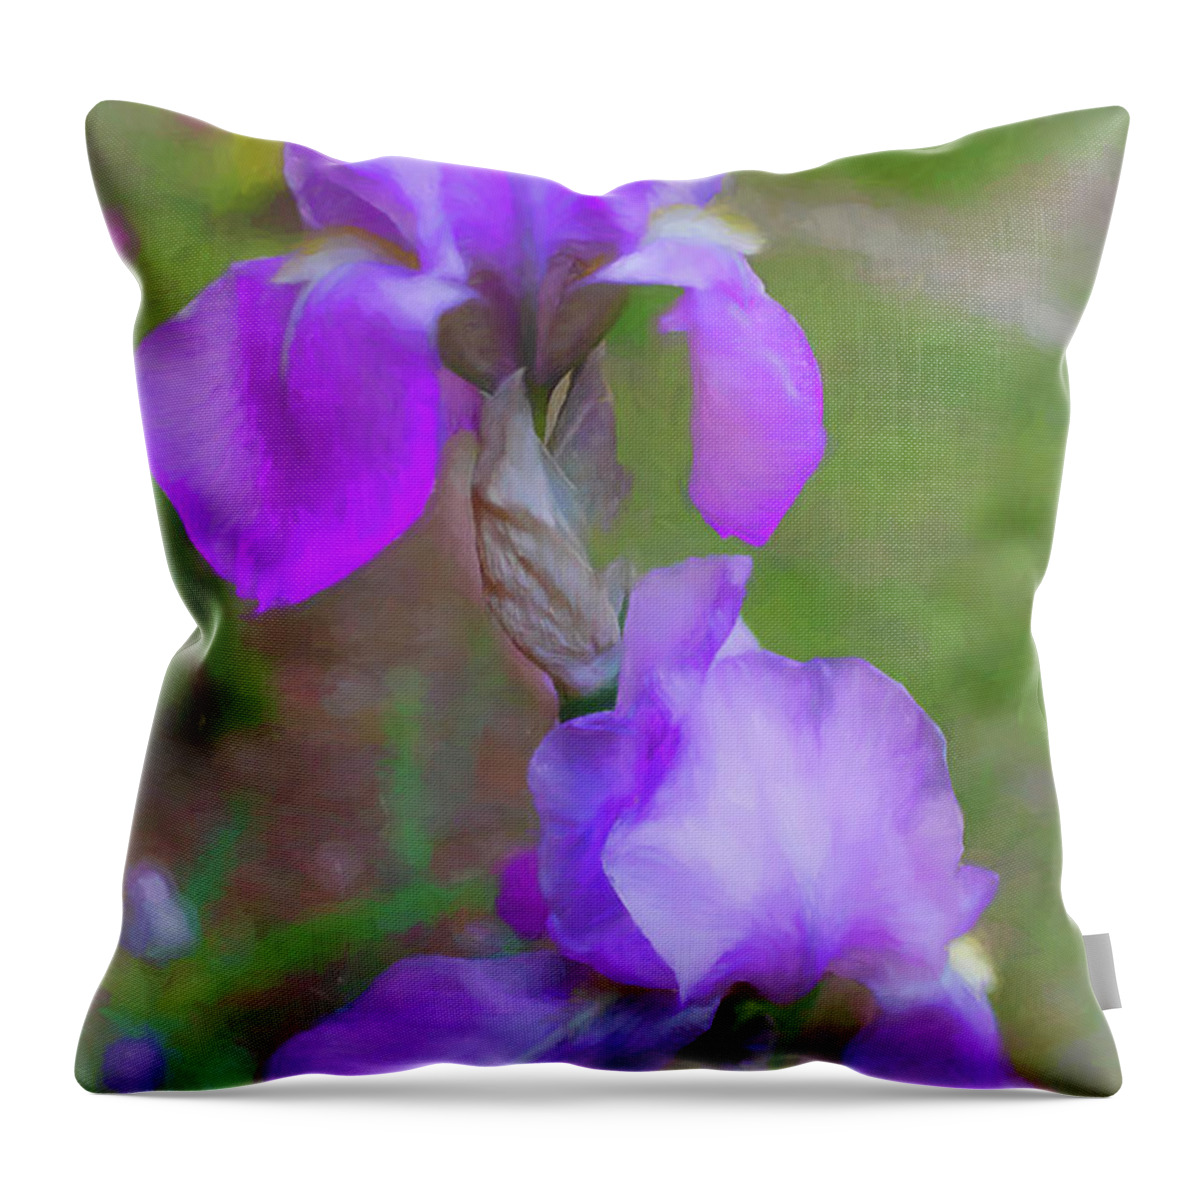 Irises Throw Pillow featuring the photograph Delicate Lavender Iris Beauties by Ola Allen